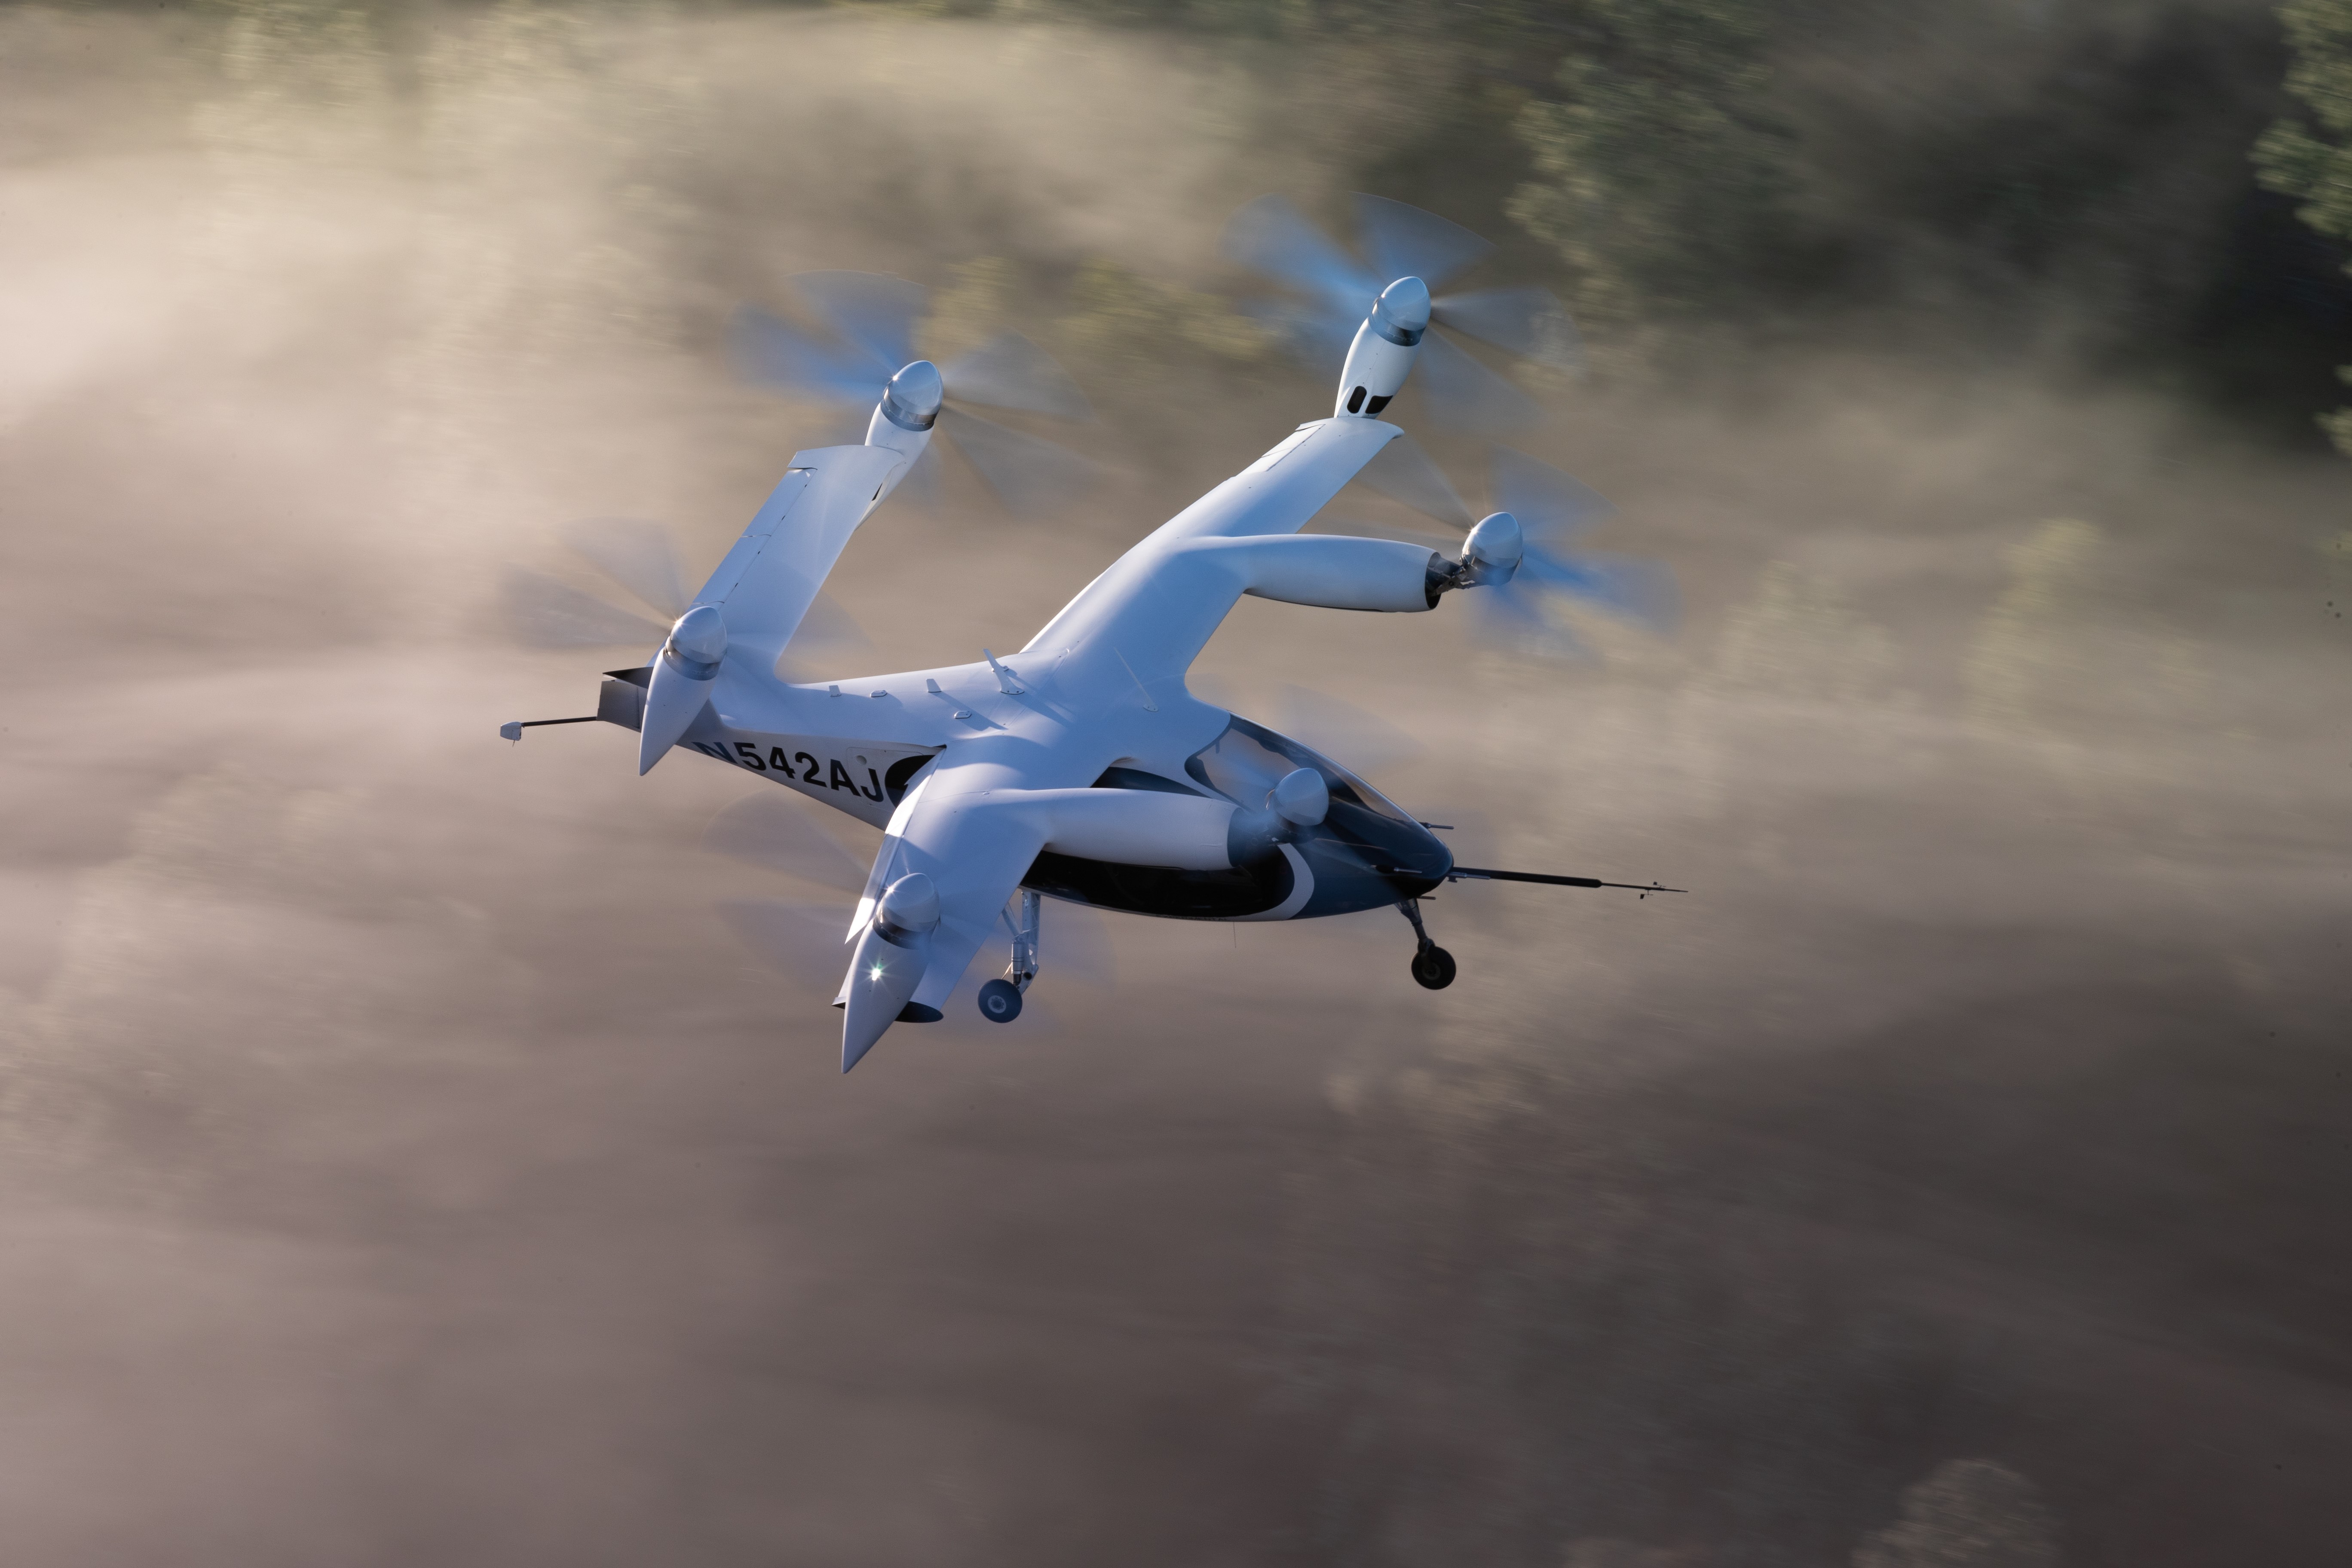 The all-electric Joby aircraft in flight above the company's Electric Flight Base in California
Click here to download picture in high resolution: https://www.cae.com/media/documents/Joby_aircraft_in_flight.jpg (CNW Group/CAE INC.)